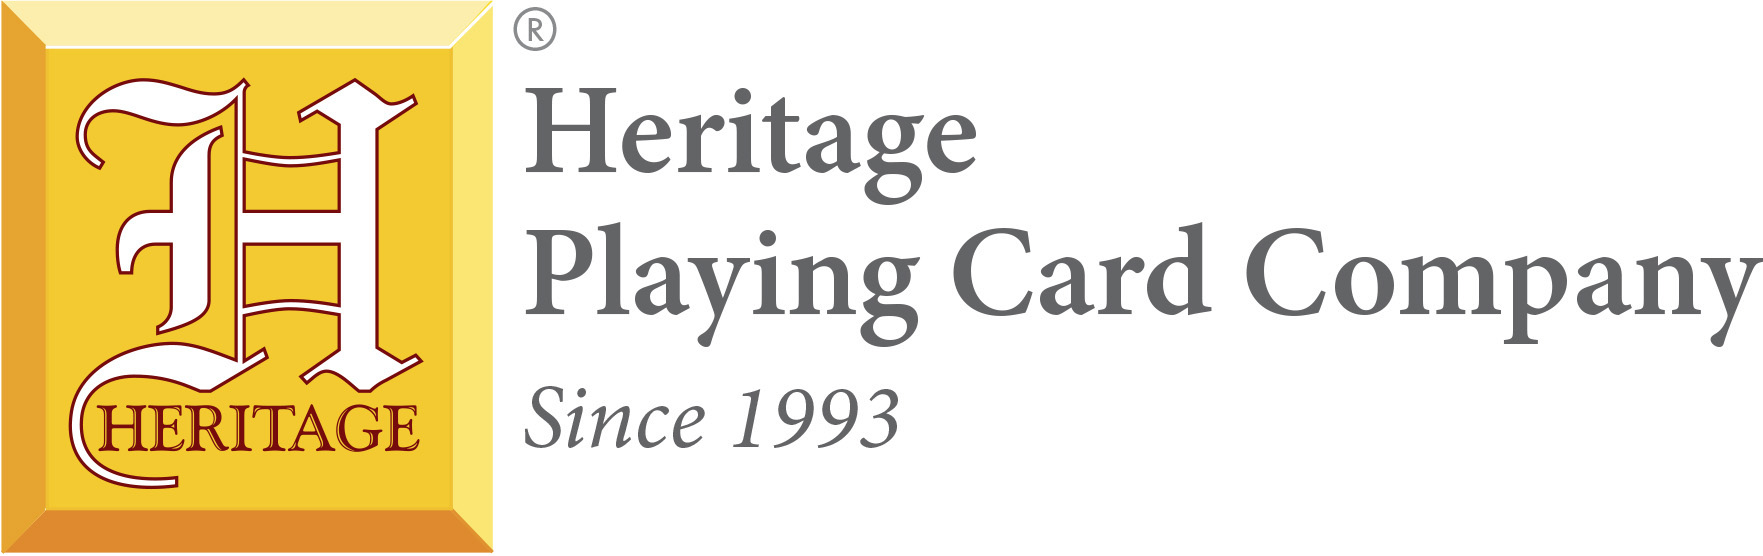 logo for Heritage Playing Card Company Ltd